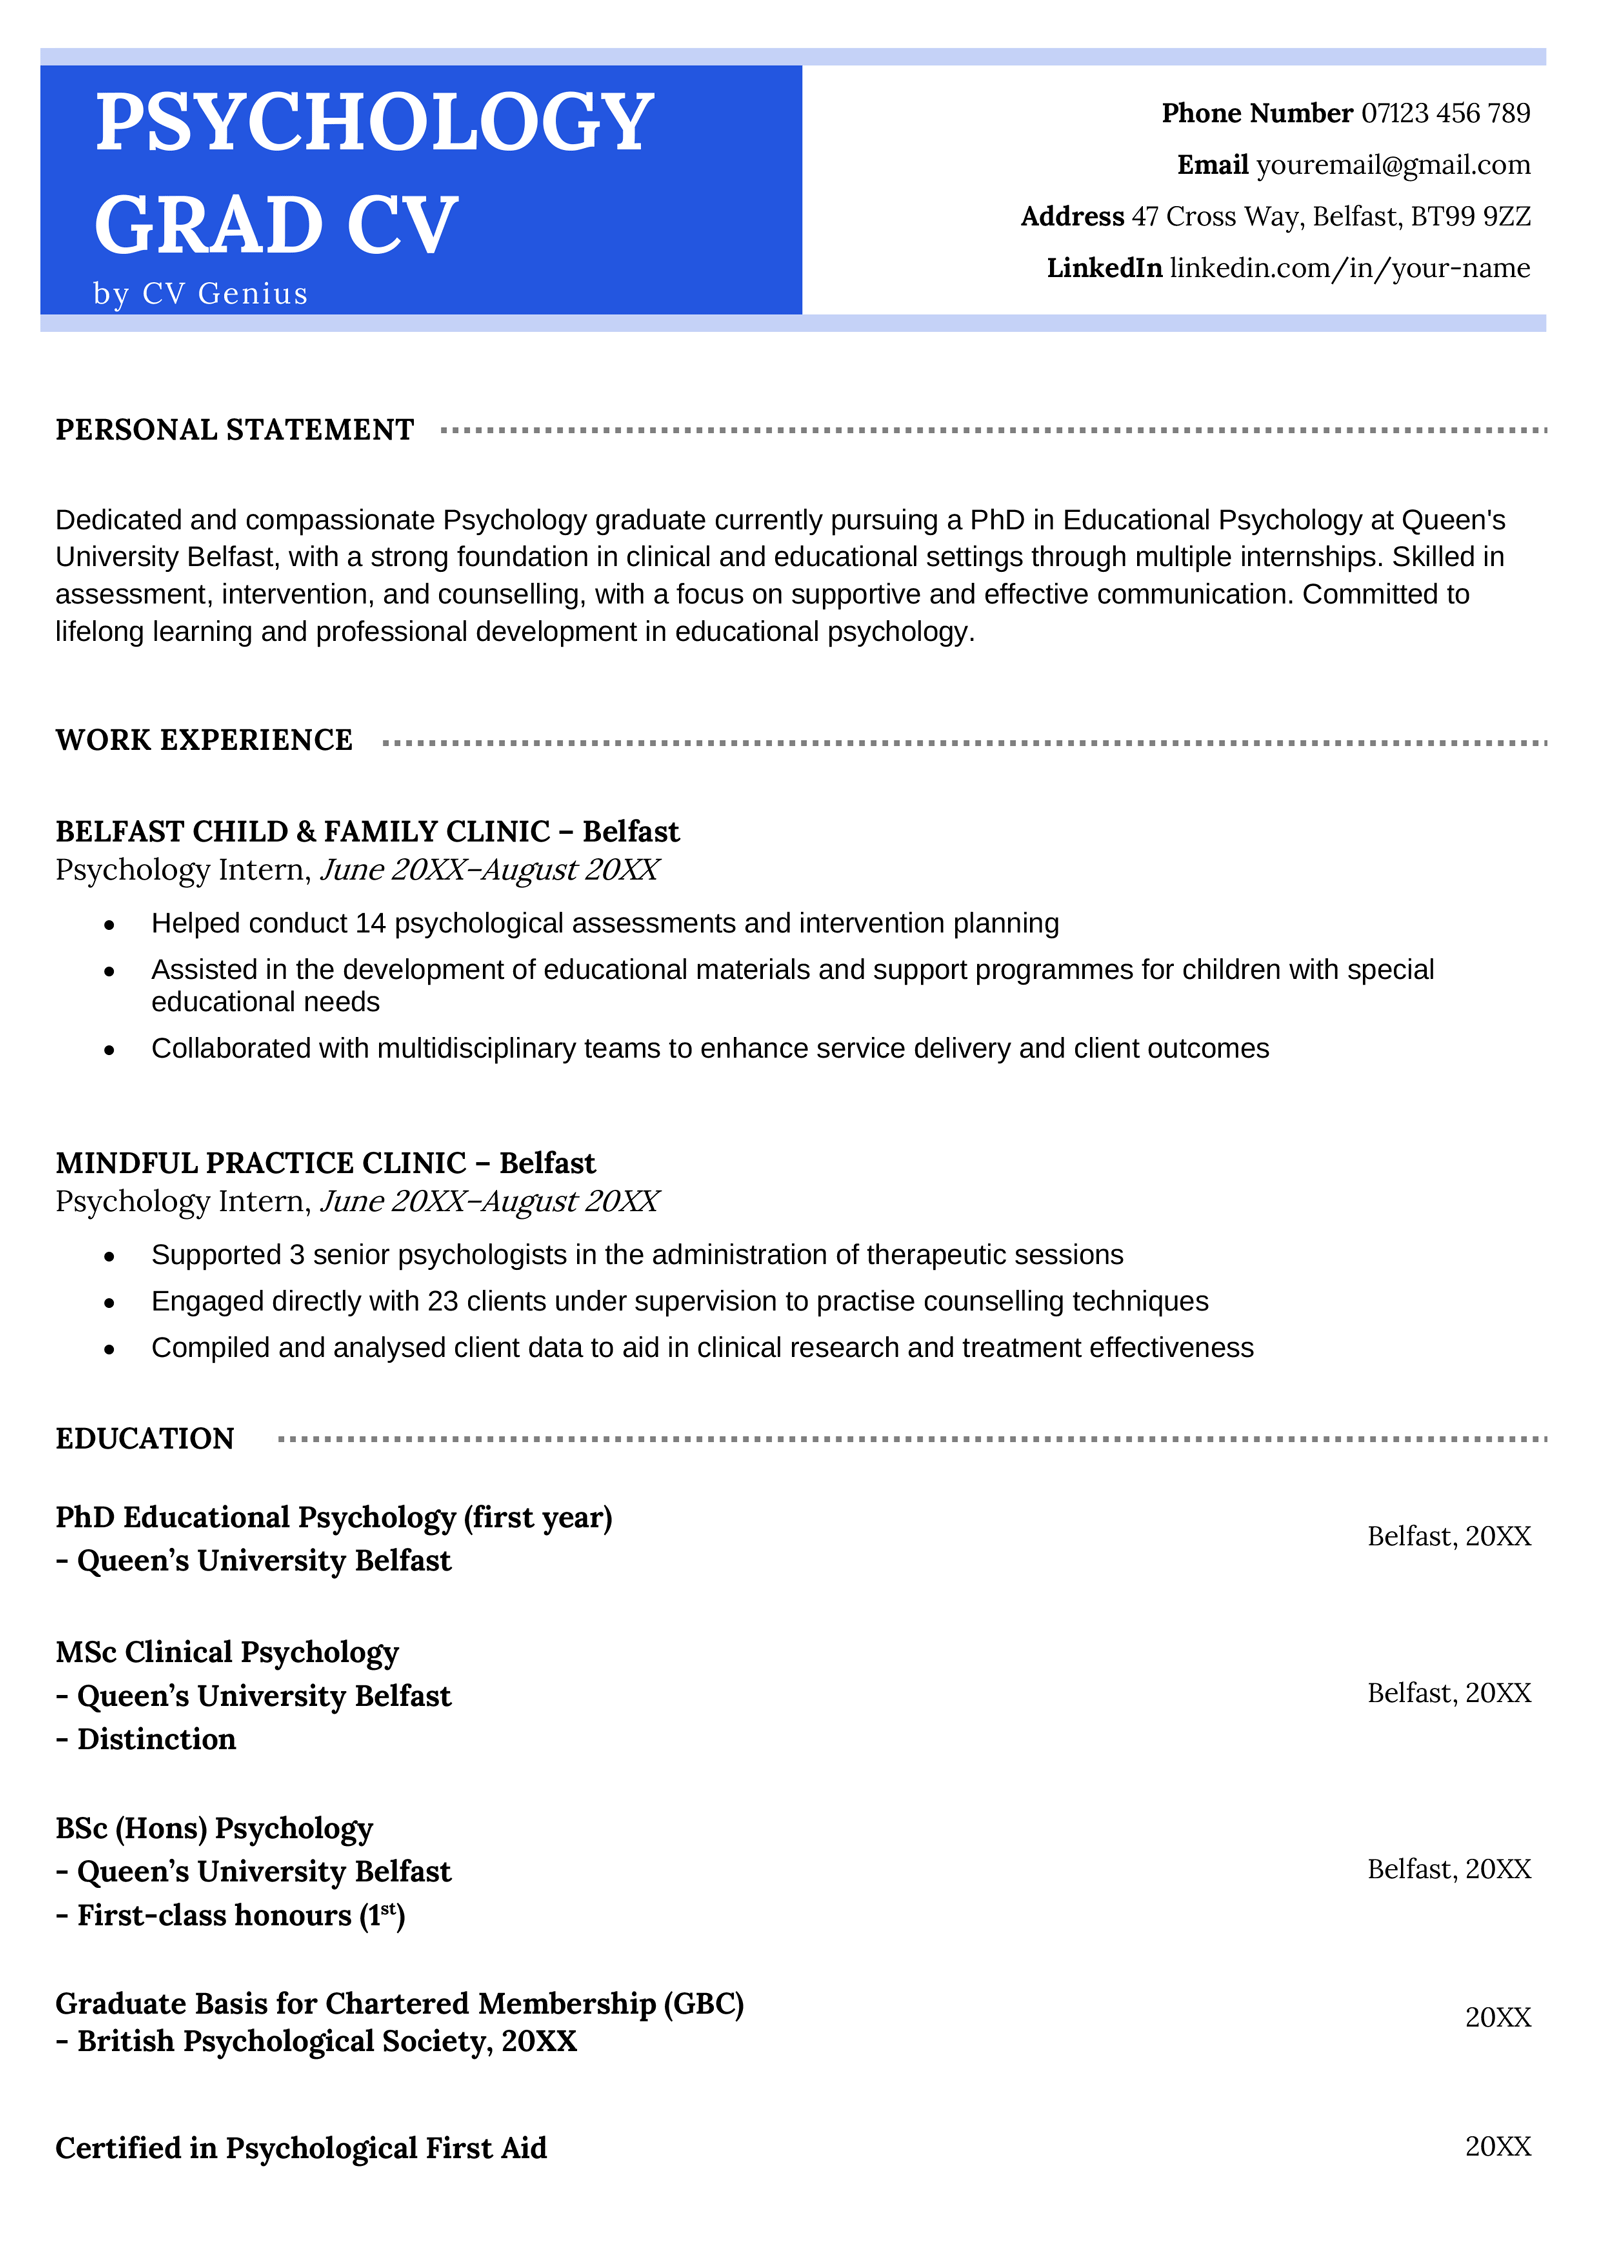 A psychology graduate CV example in blue with a large education section that takes up around half the page.